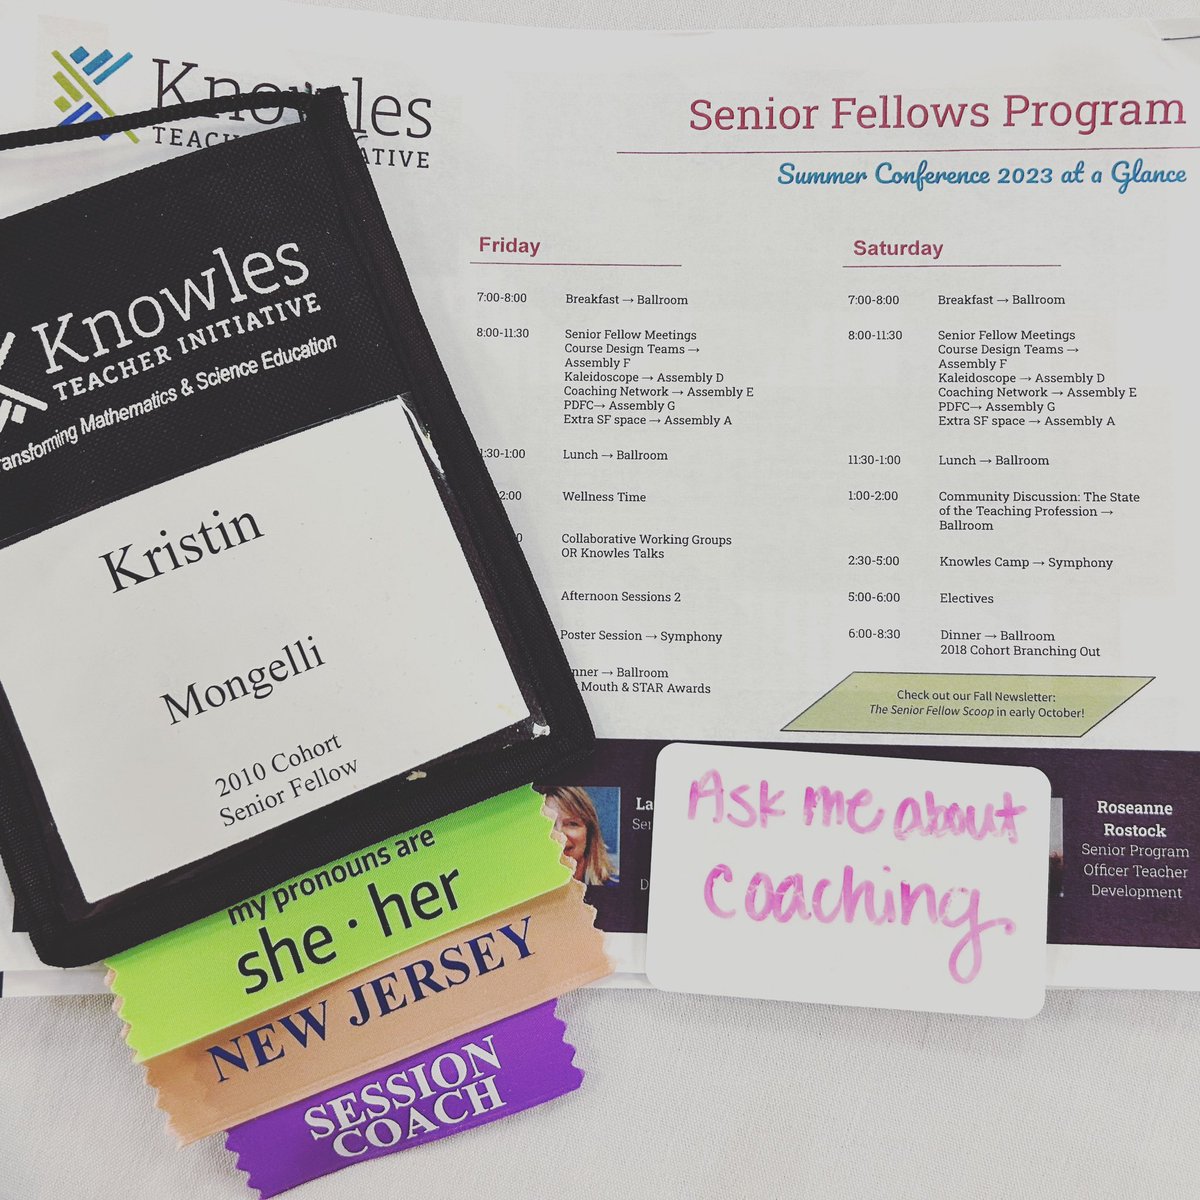 Grateful to be at the @KnowlesTeachers Summer Conference this Thursday - Saturday. We have engaged in Coaching Network Leadership Team collaborative work, I have coached sessions, connected fellows around science/math teaching and instructional coaching! #knowlesteachersmeet